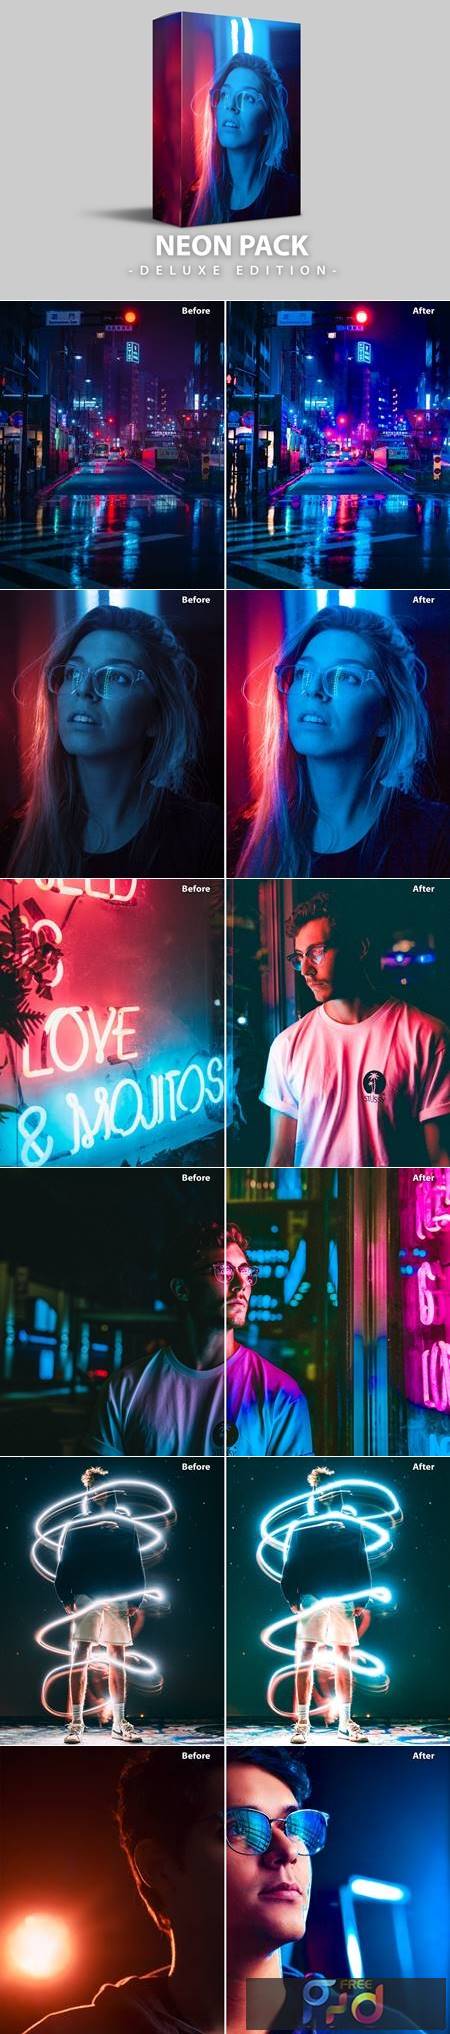 Neon Pack - Deluxe Edition for mobile and desktop LVAX9E6 1